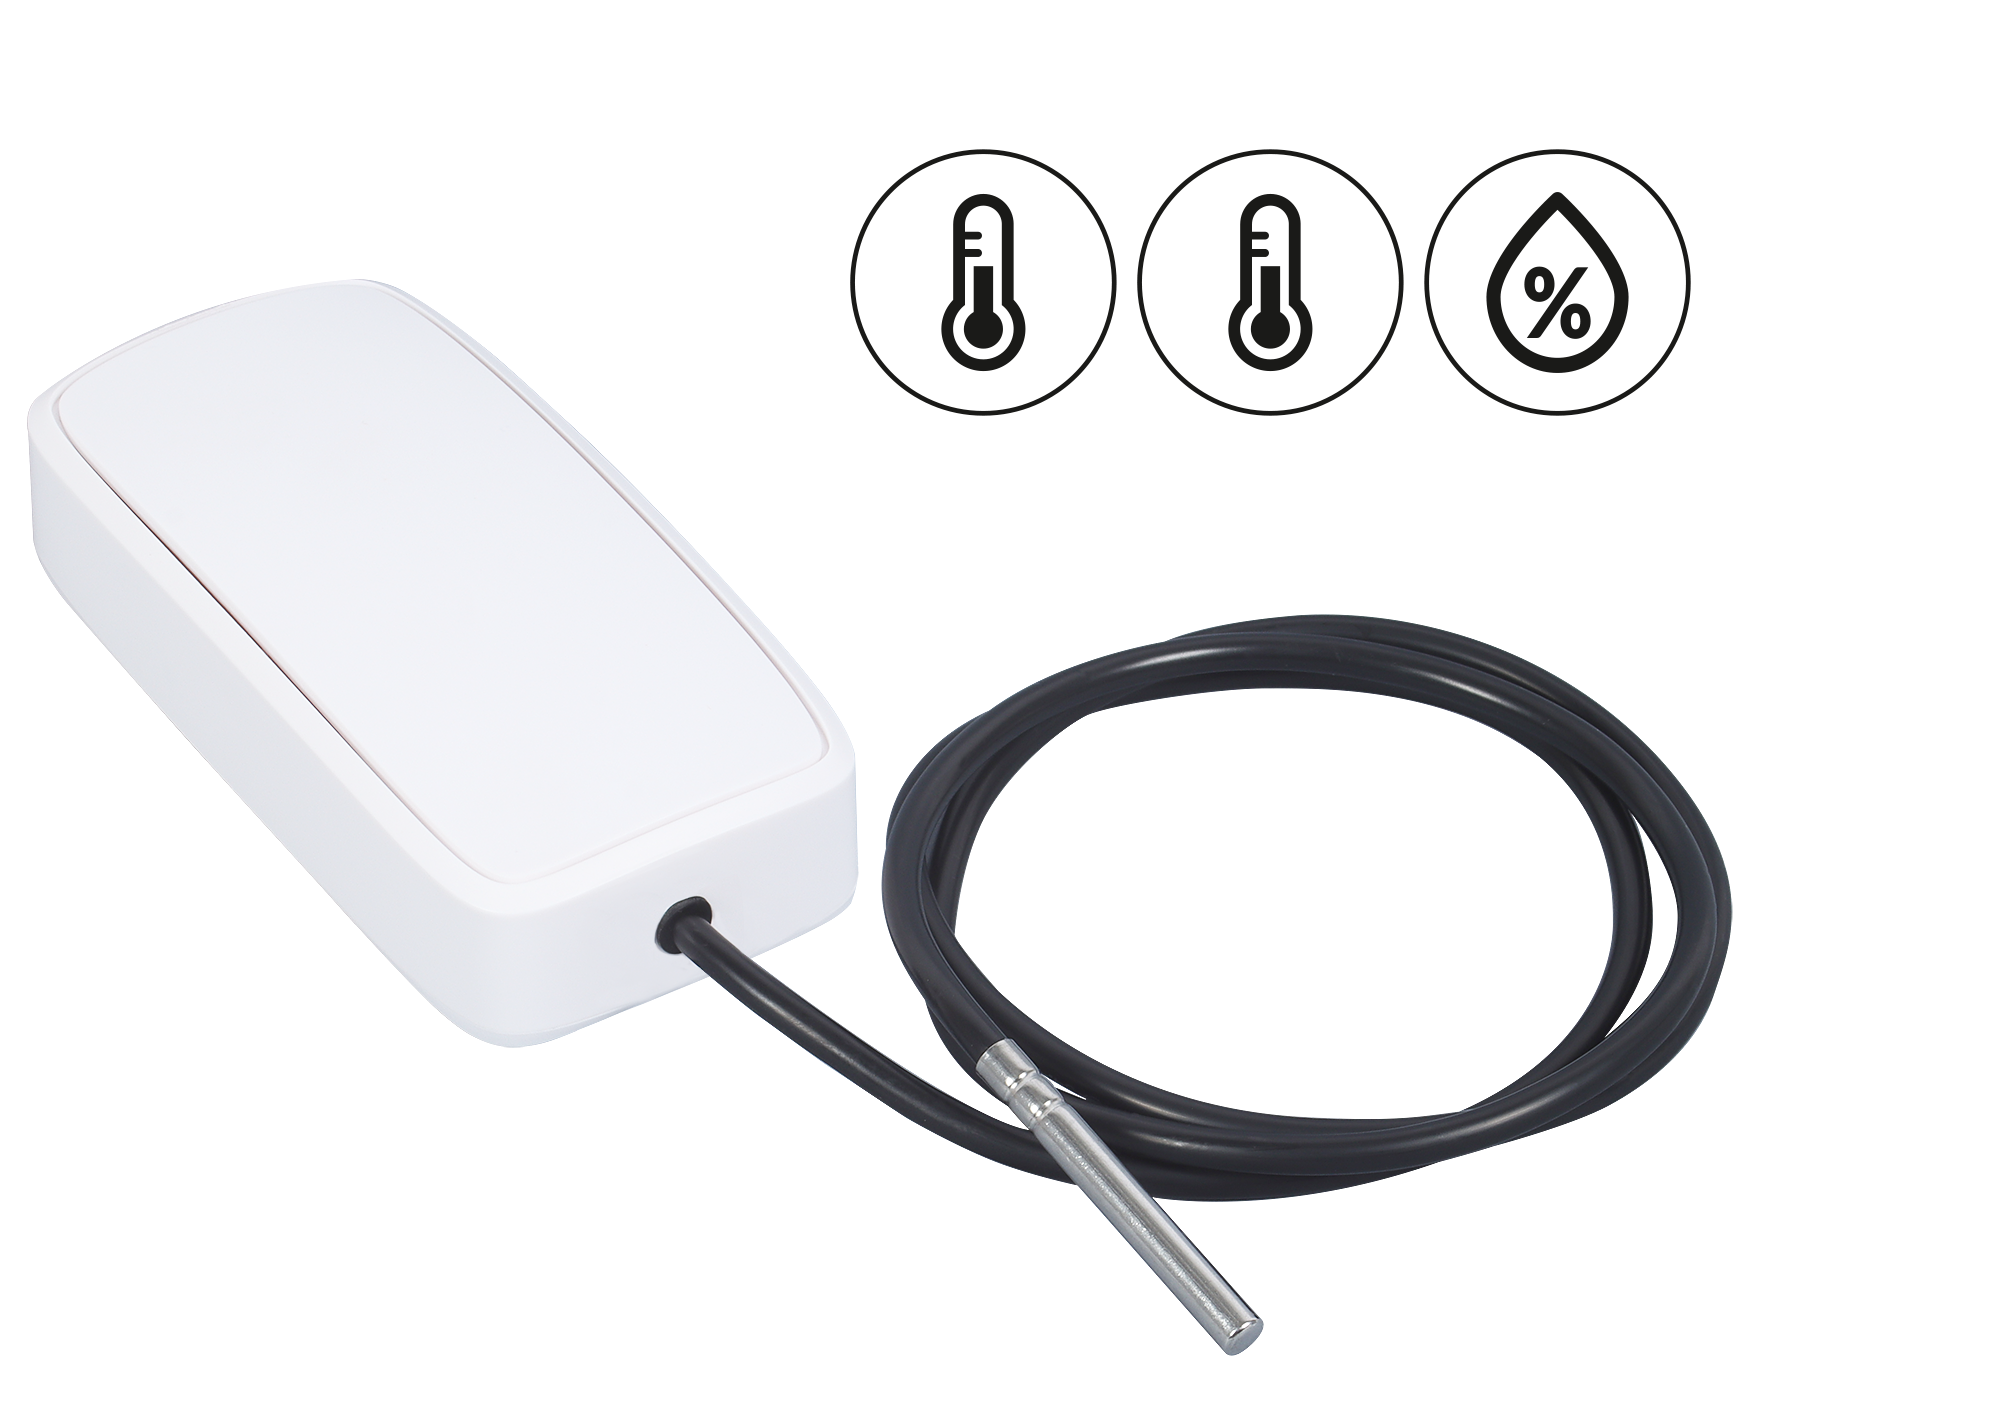 https://getefento.com/wp-content/uploads/2022/01/efento-nb-iot-logger-with-temperature-probe-temp-temp-hum.png